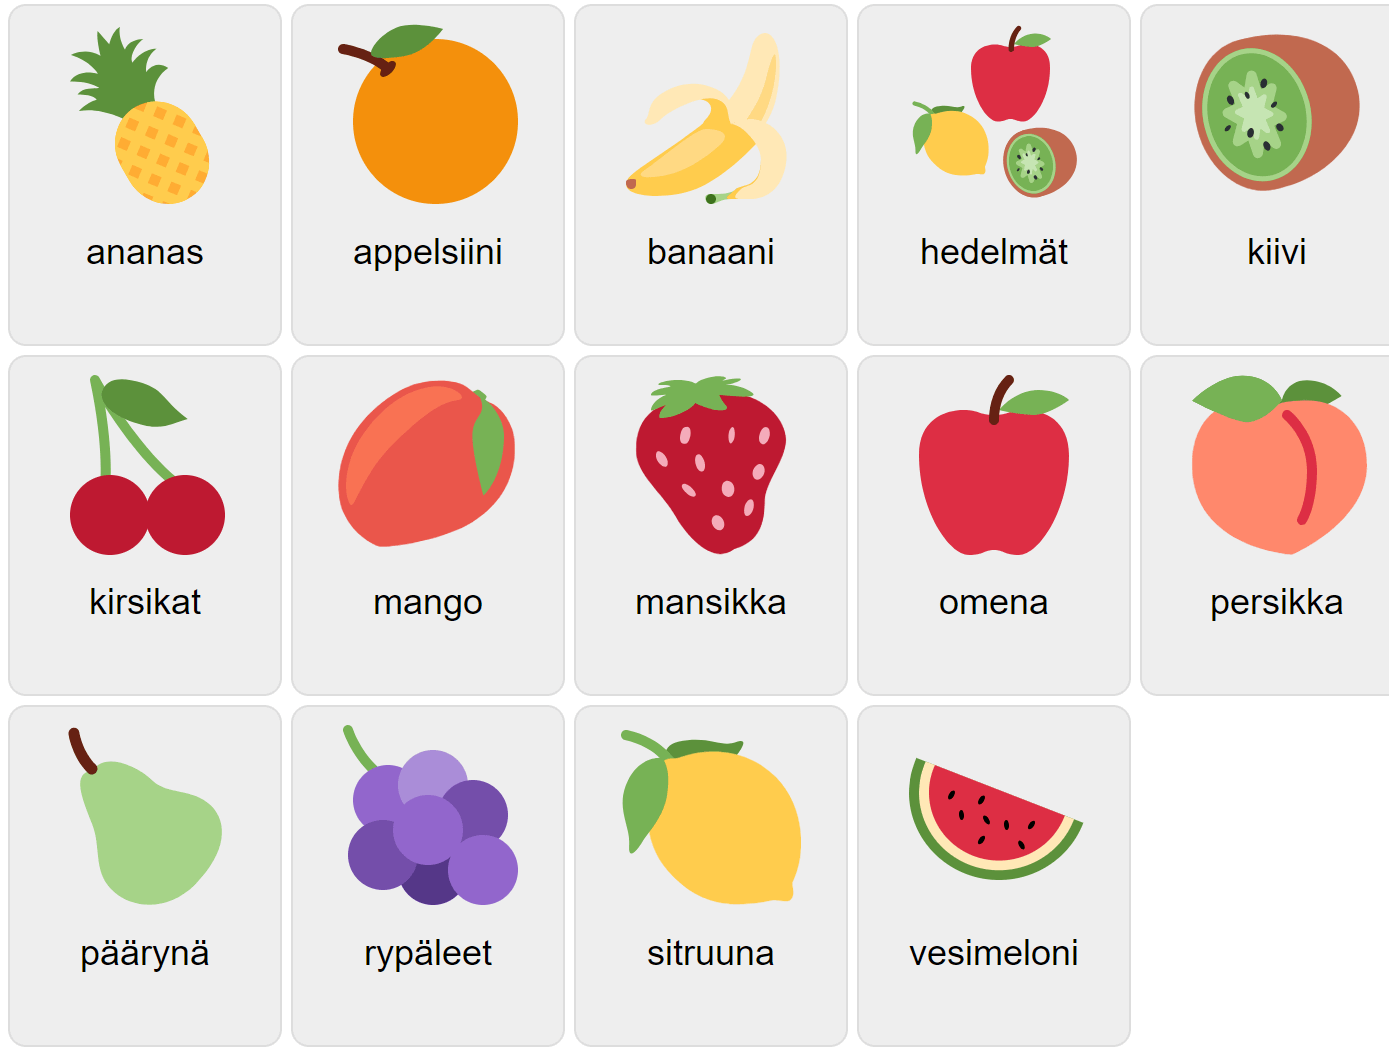 Fruits in Finnish